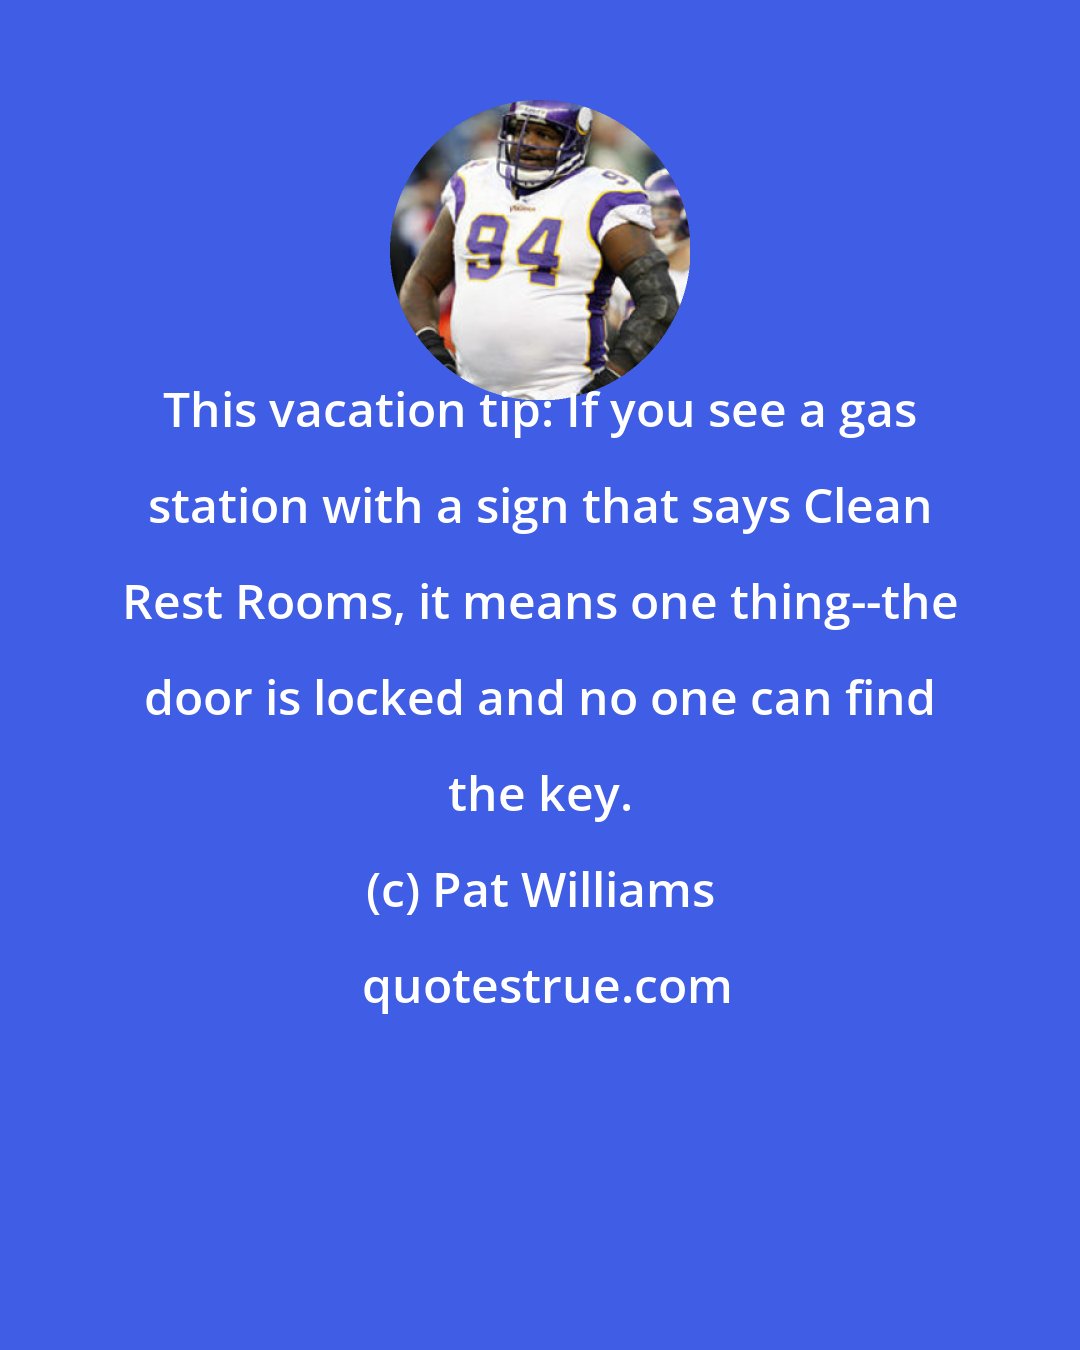 Pat Williams: This vacation tip: If you see a gas station with a sign that says Clean Rest Rooms, it means one thing--the door is locked and no one can find the key.